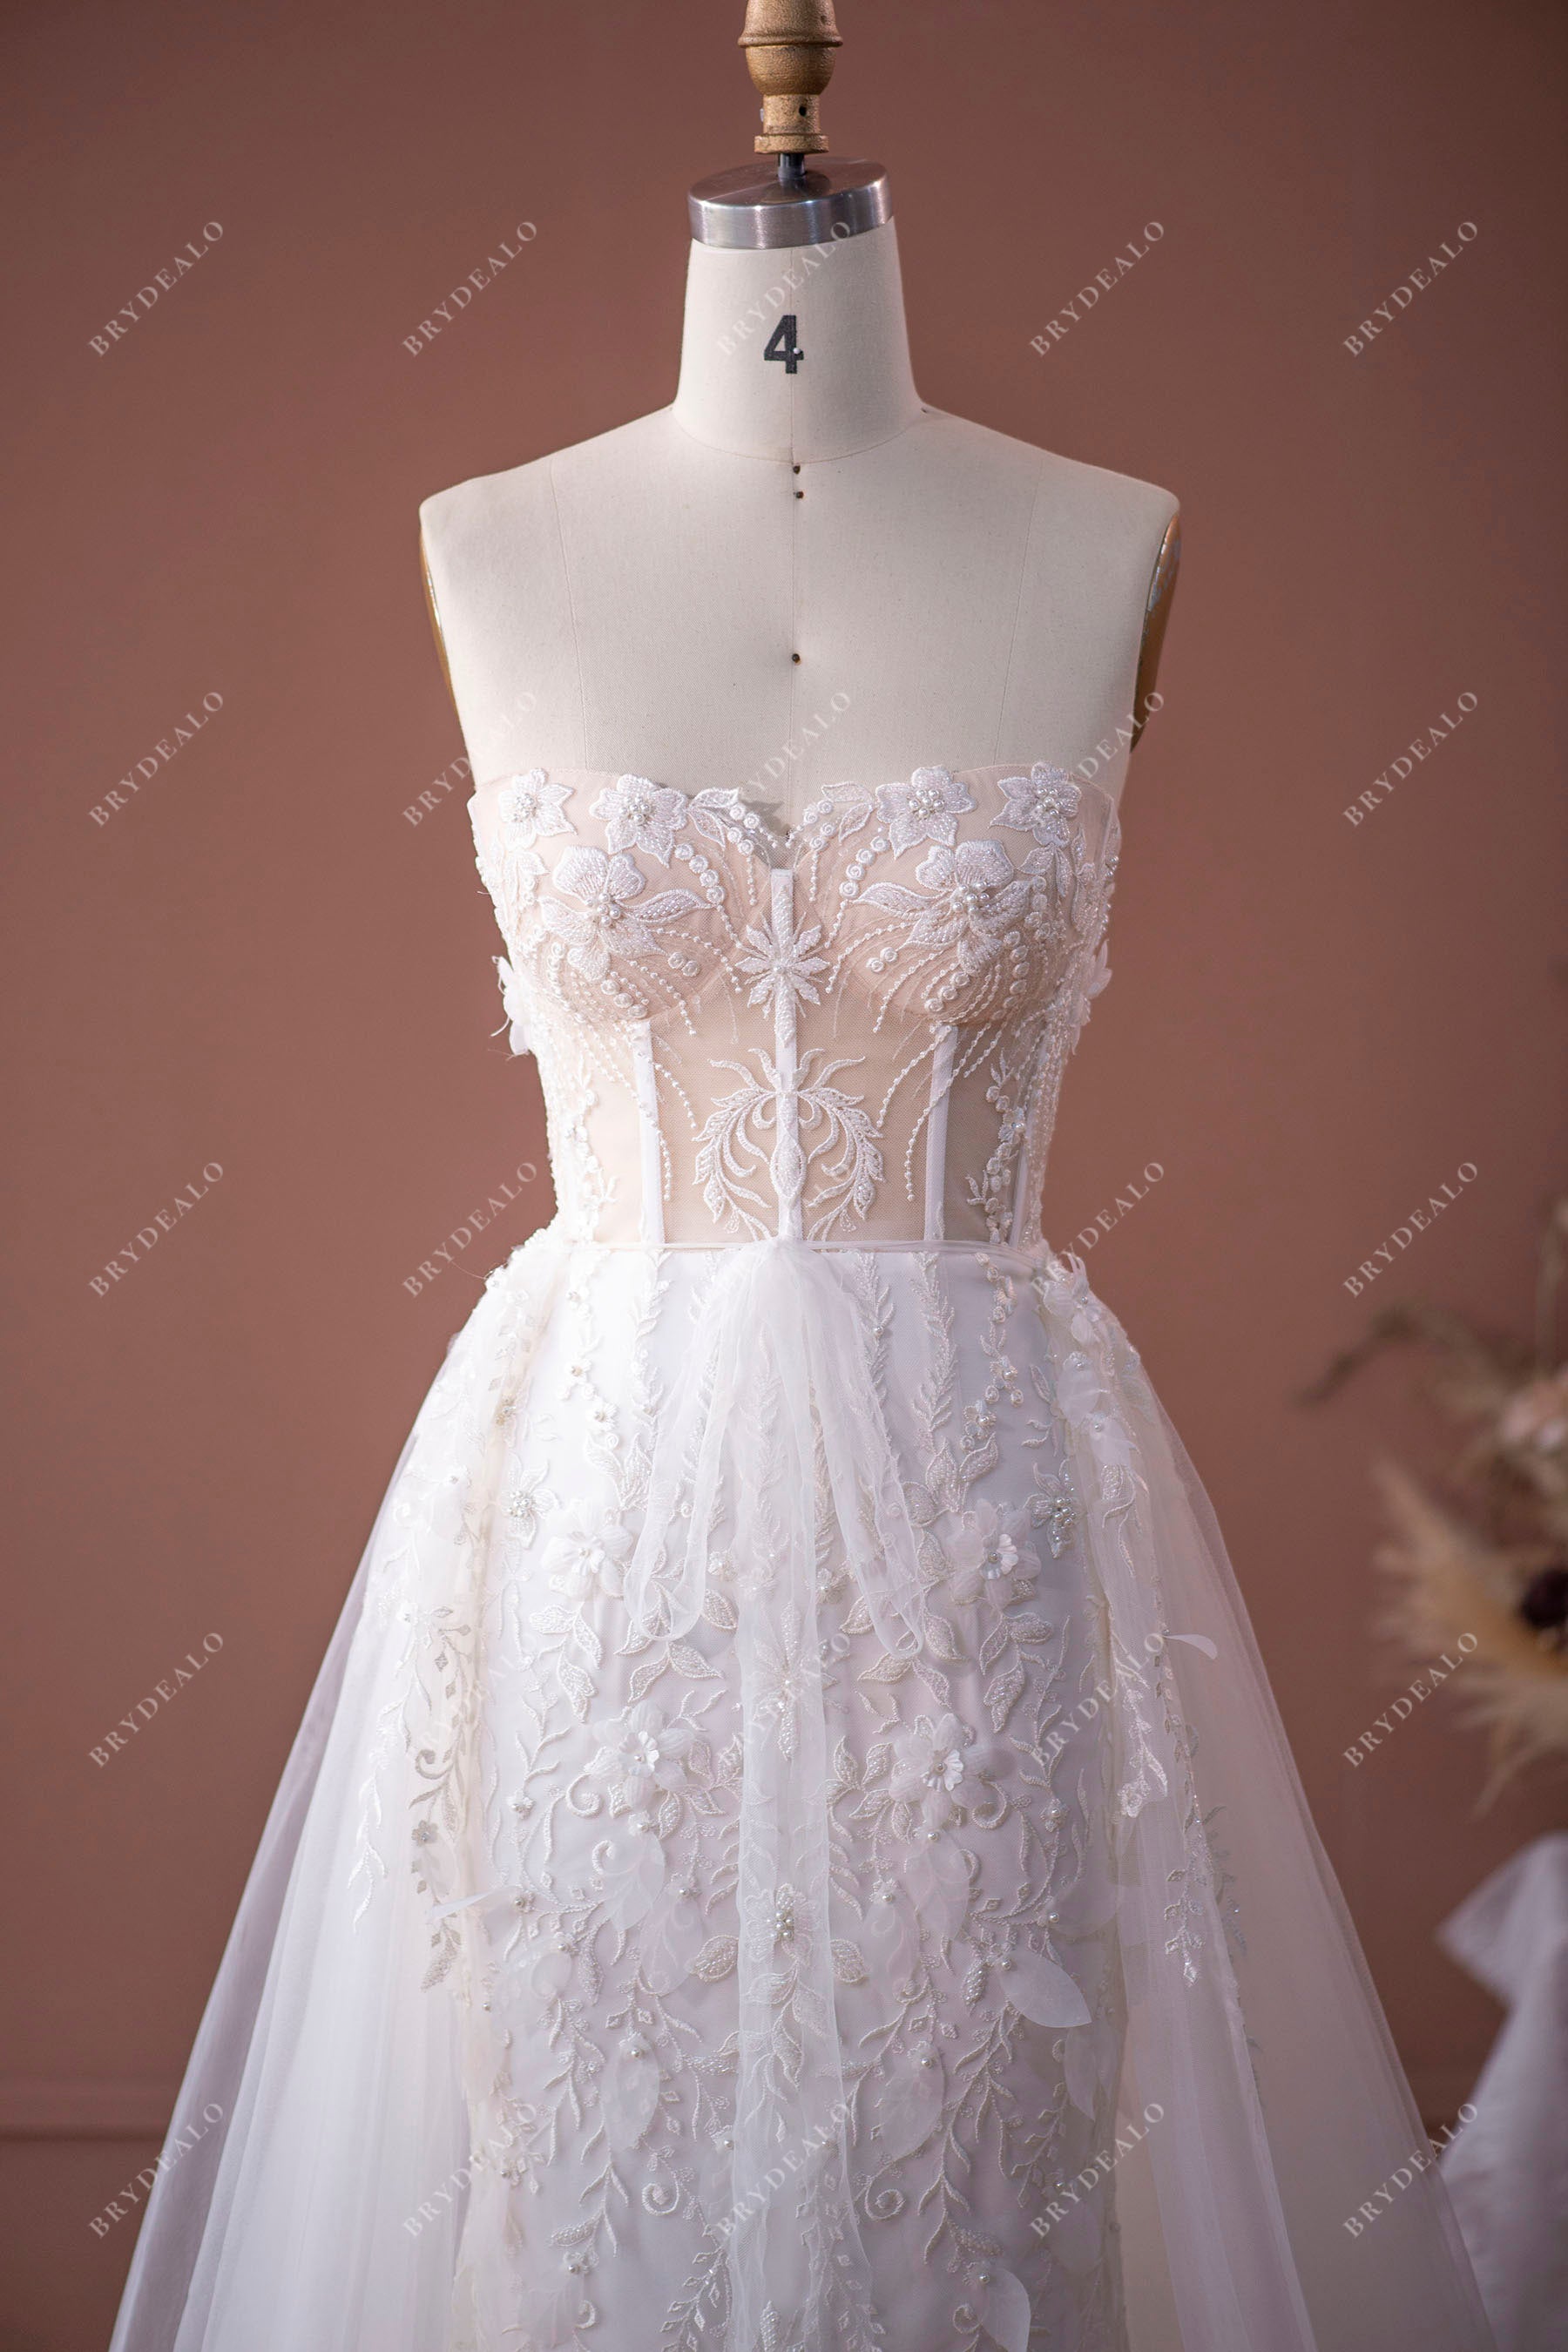 sweetheart neck strapless corset lace garden bridal gown